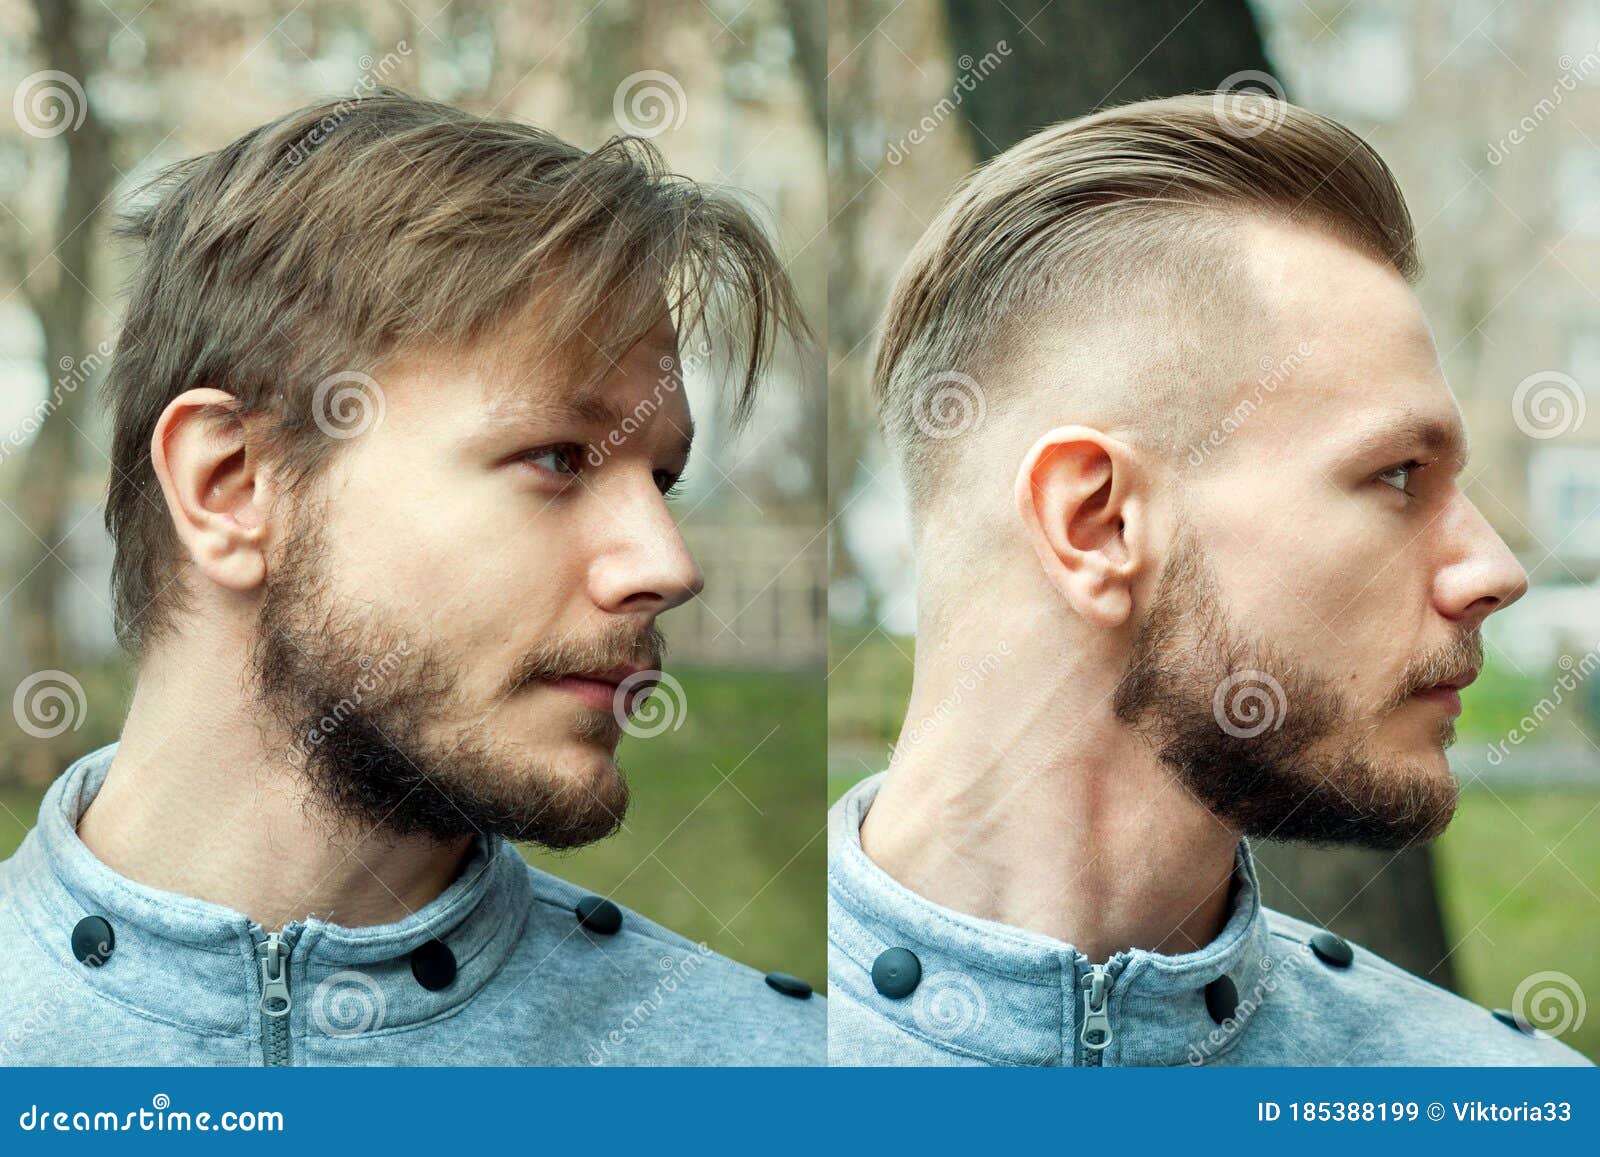 25 Fresh Side Part Haircuts for Men (2023 Trends)